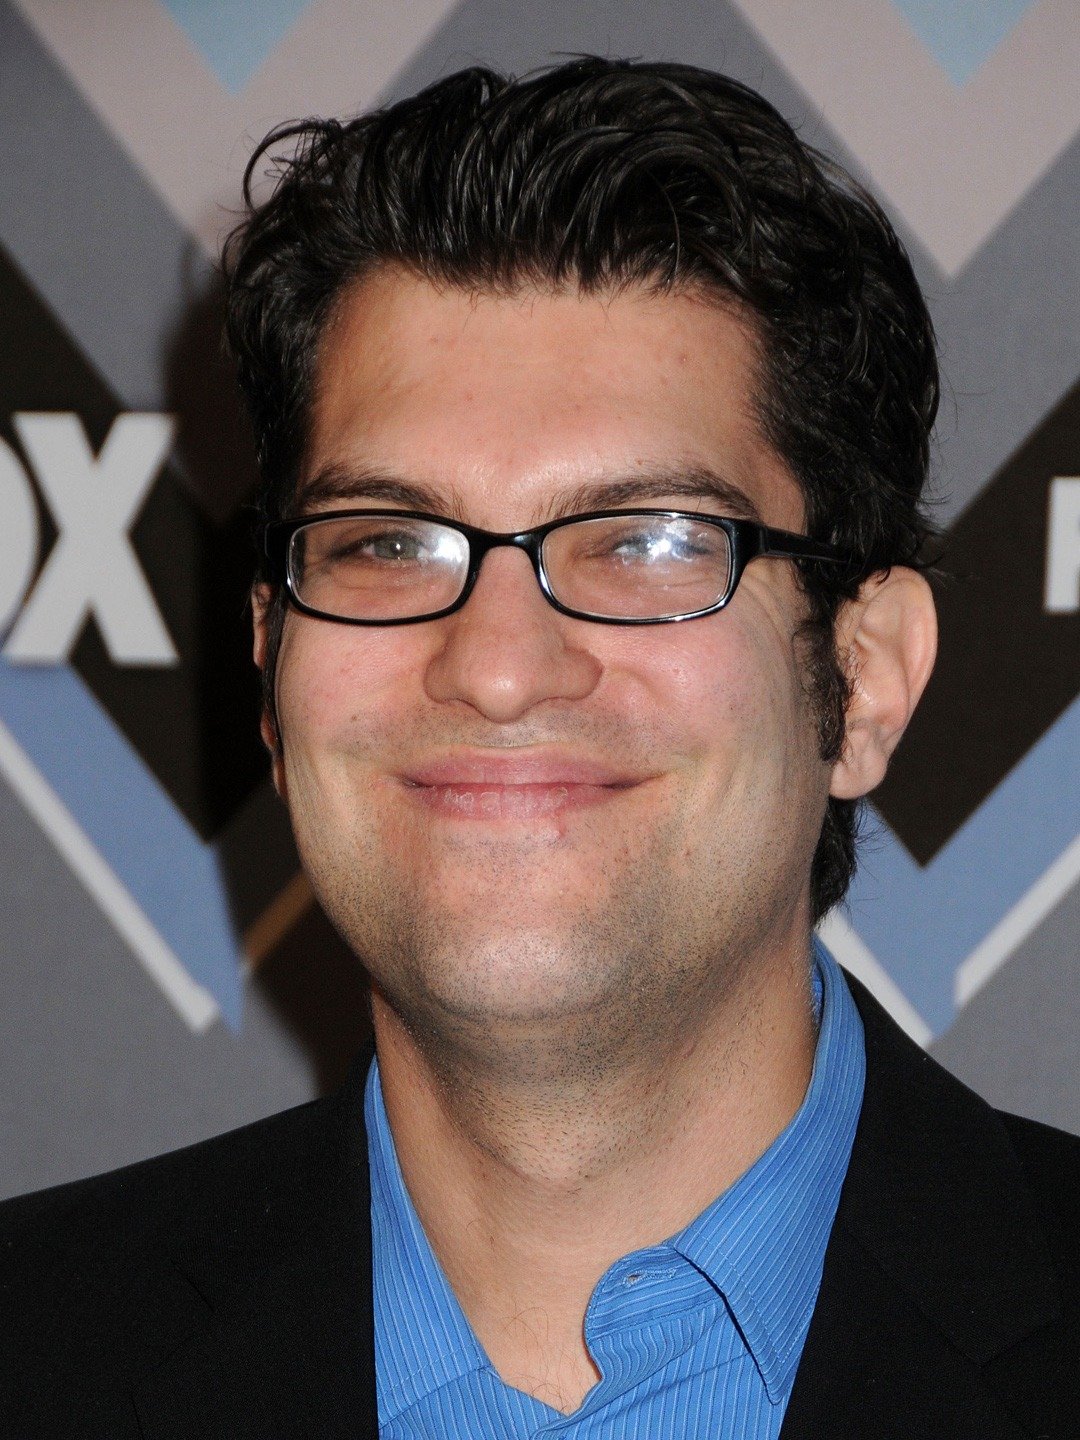 The 43-year old son of father (?) and mother(?) Dan Mintz in 2024 photo. Dan Mintz earned a  million dollar salary - leaving the net worth at 18 million in 2024